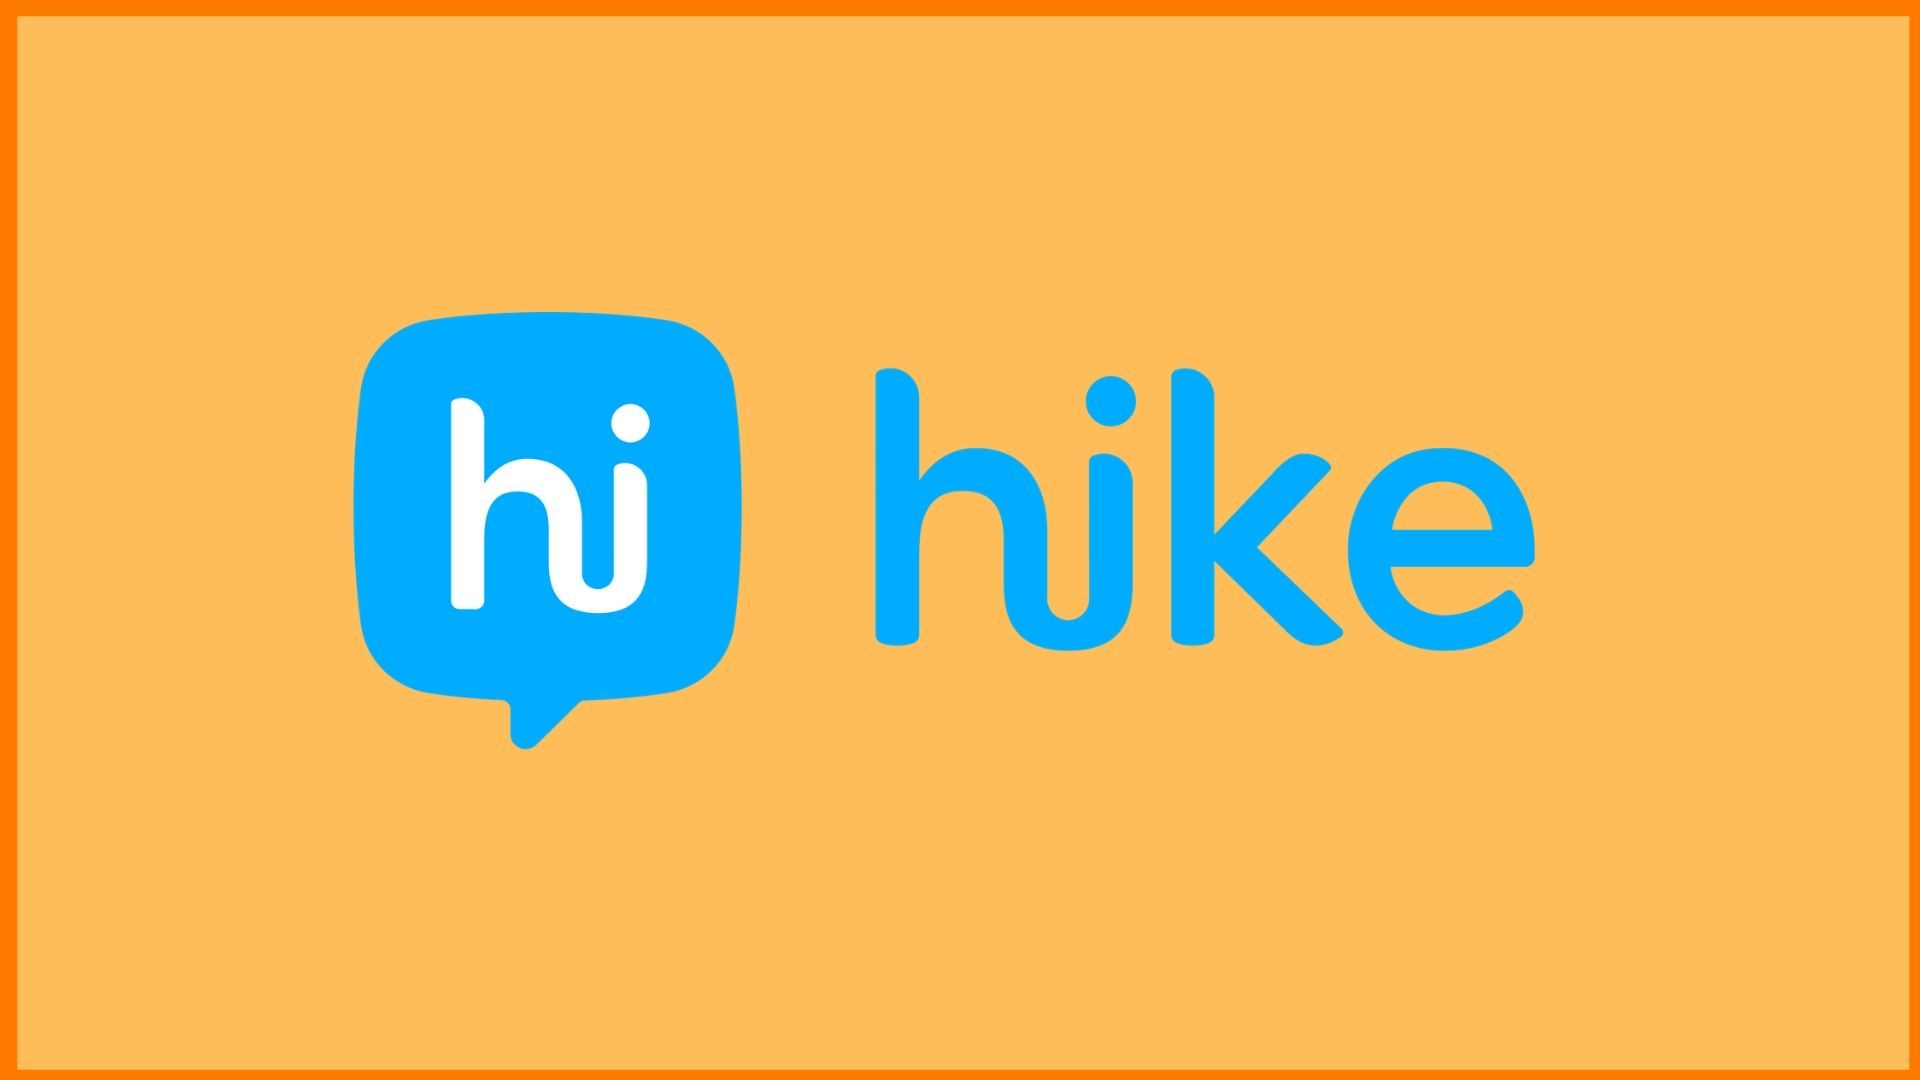 Hike Messenger - An Indian Messaging App That Has Gained Popularity Worldwide!